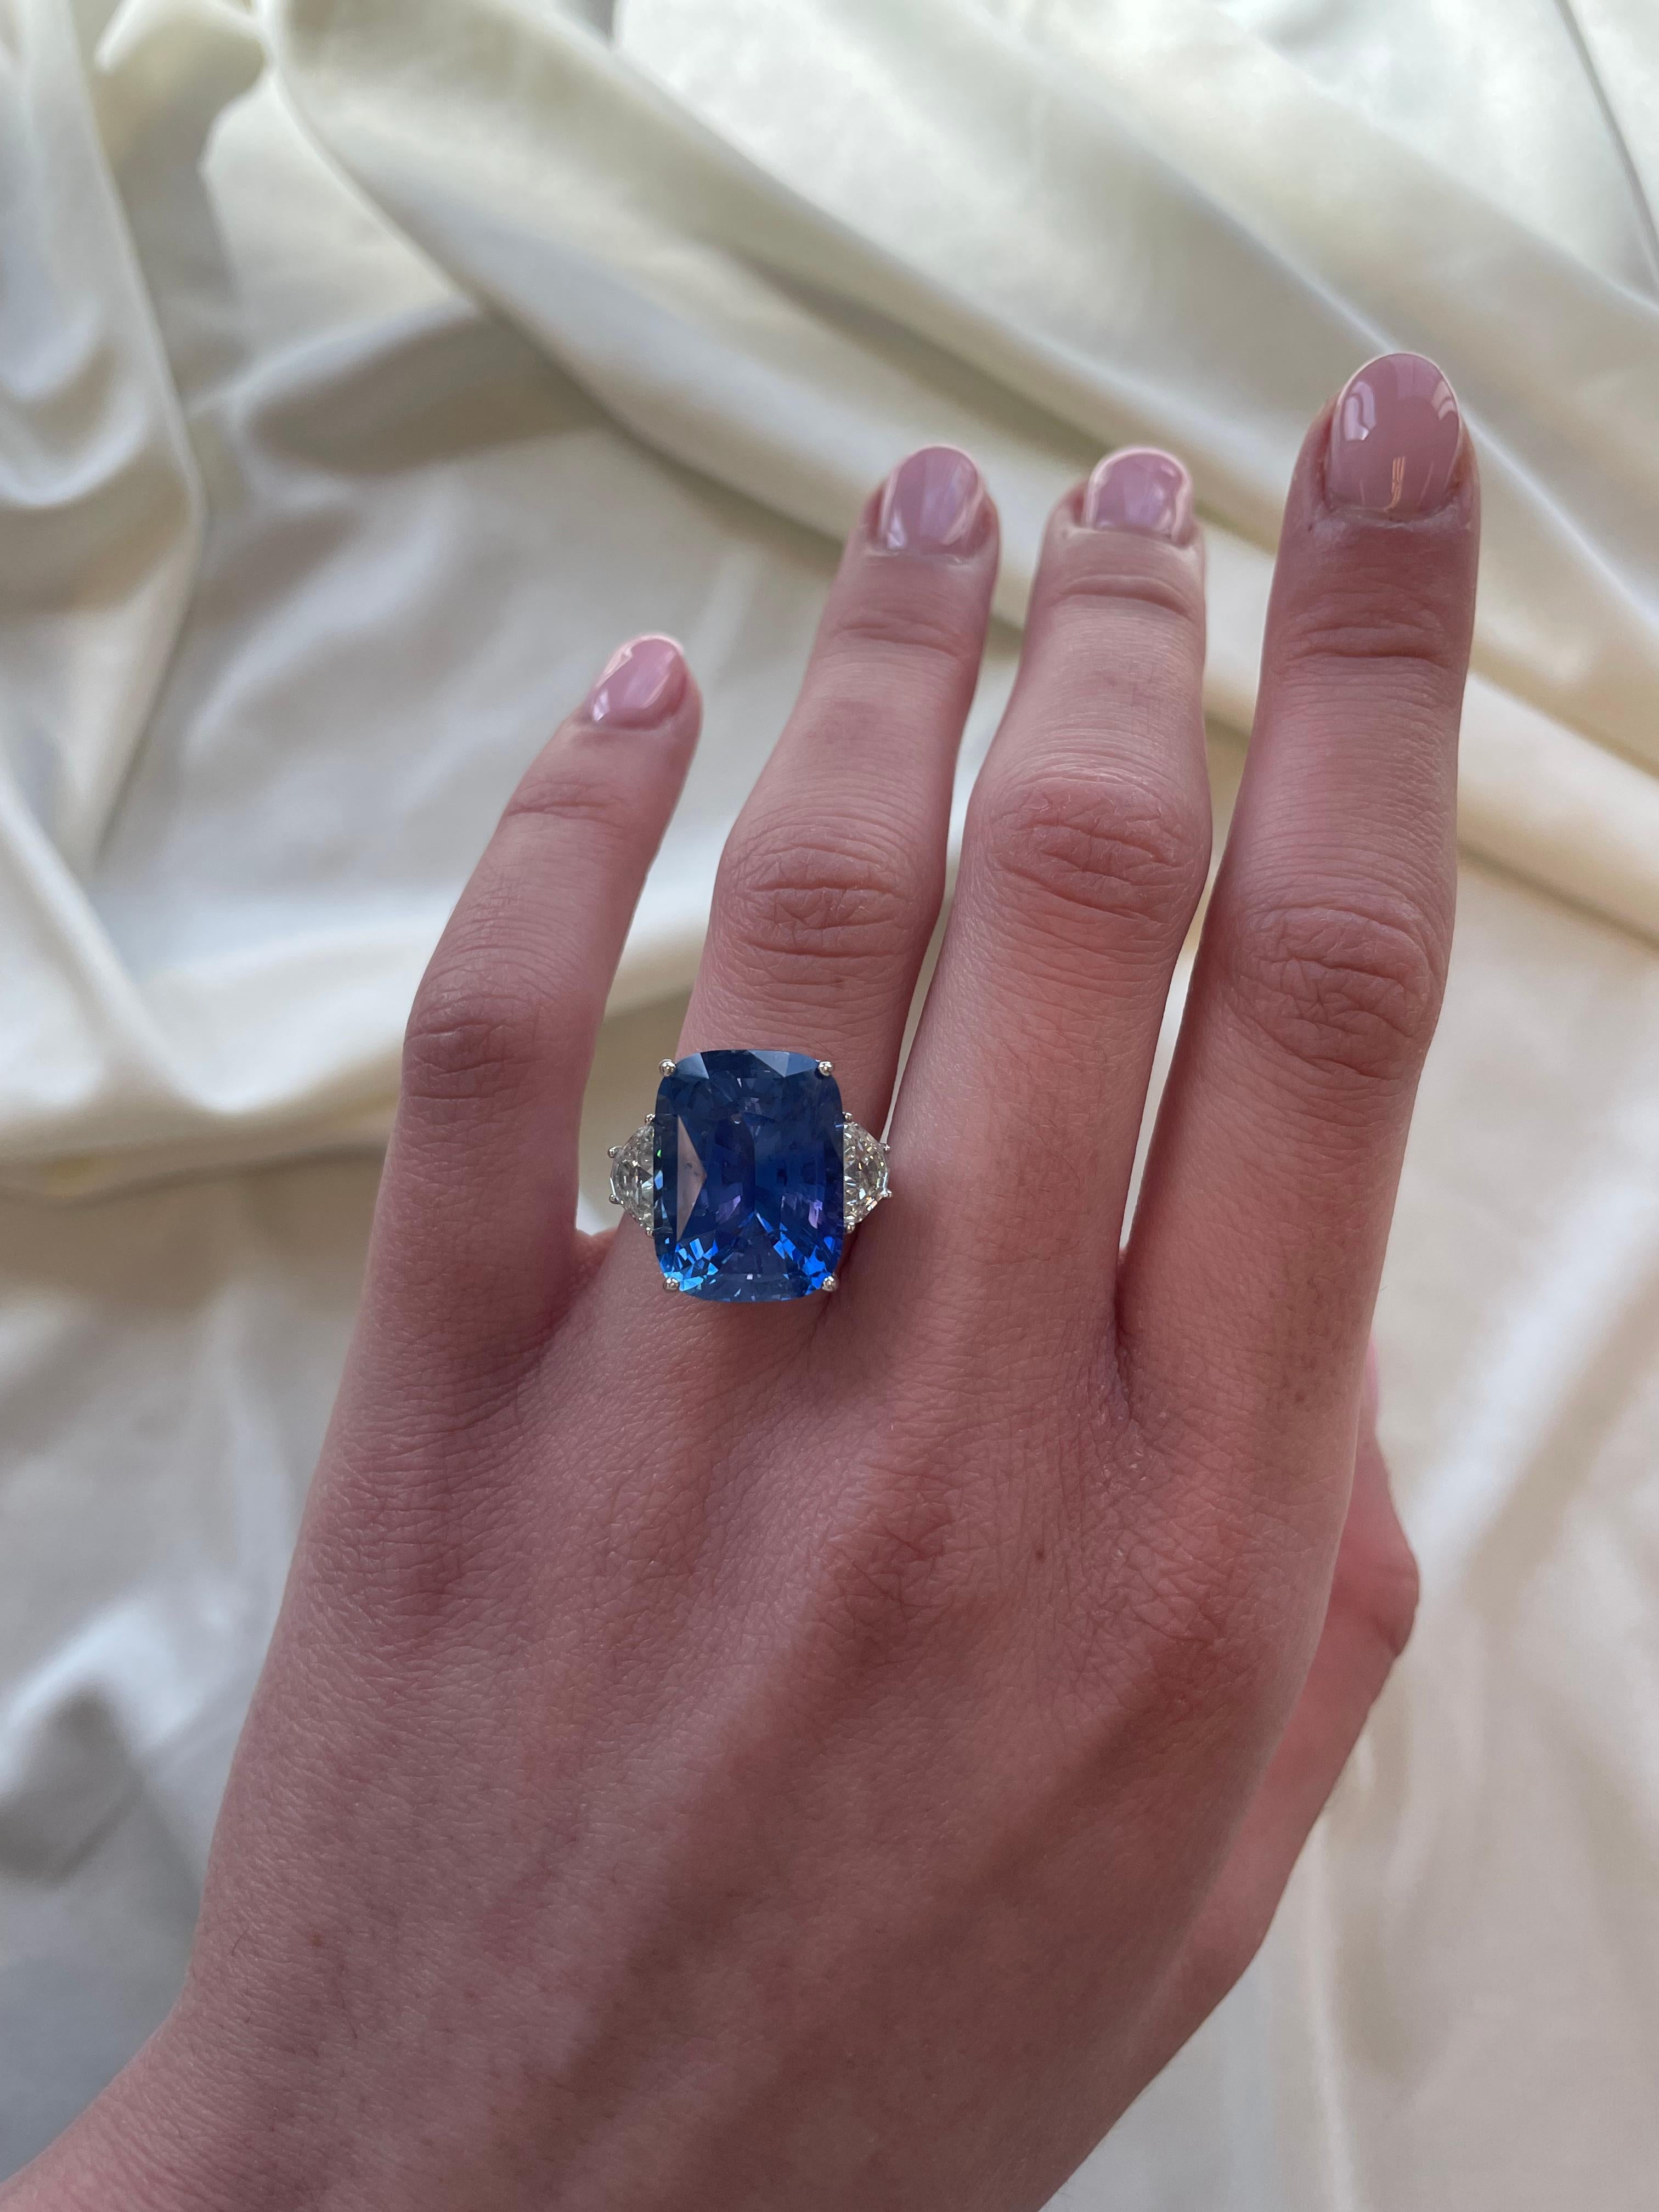 Exquisite GIA certified no-heat sapphire and diamond three stone ring. High jewelry by Alexander Beverly Hills. 
17.42 carats total gemstone weight.
16.20 carat cushion sapphire, no-heat, GIA certified. Complimented with 1.22ct of brilliant diamonds